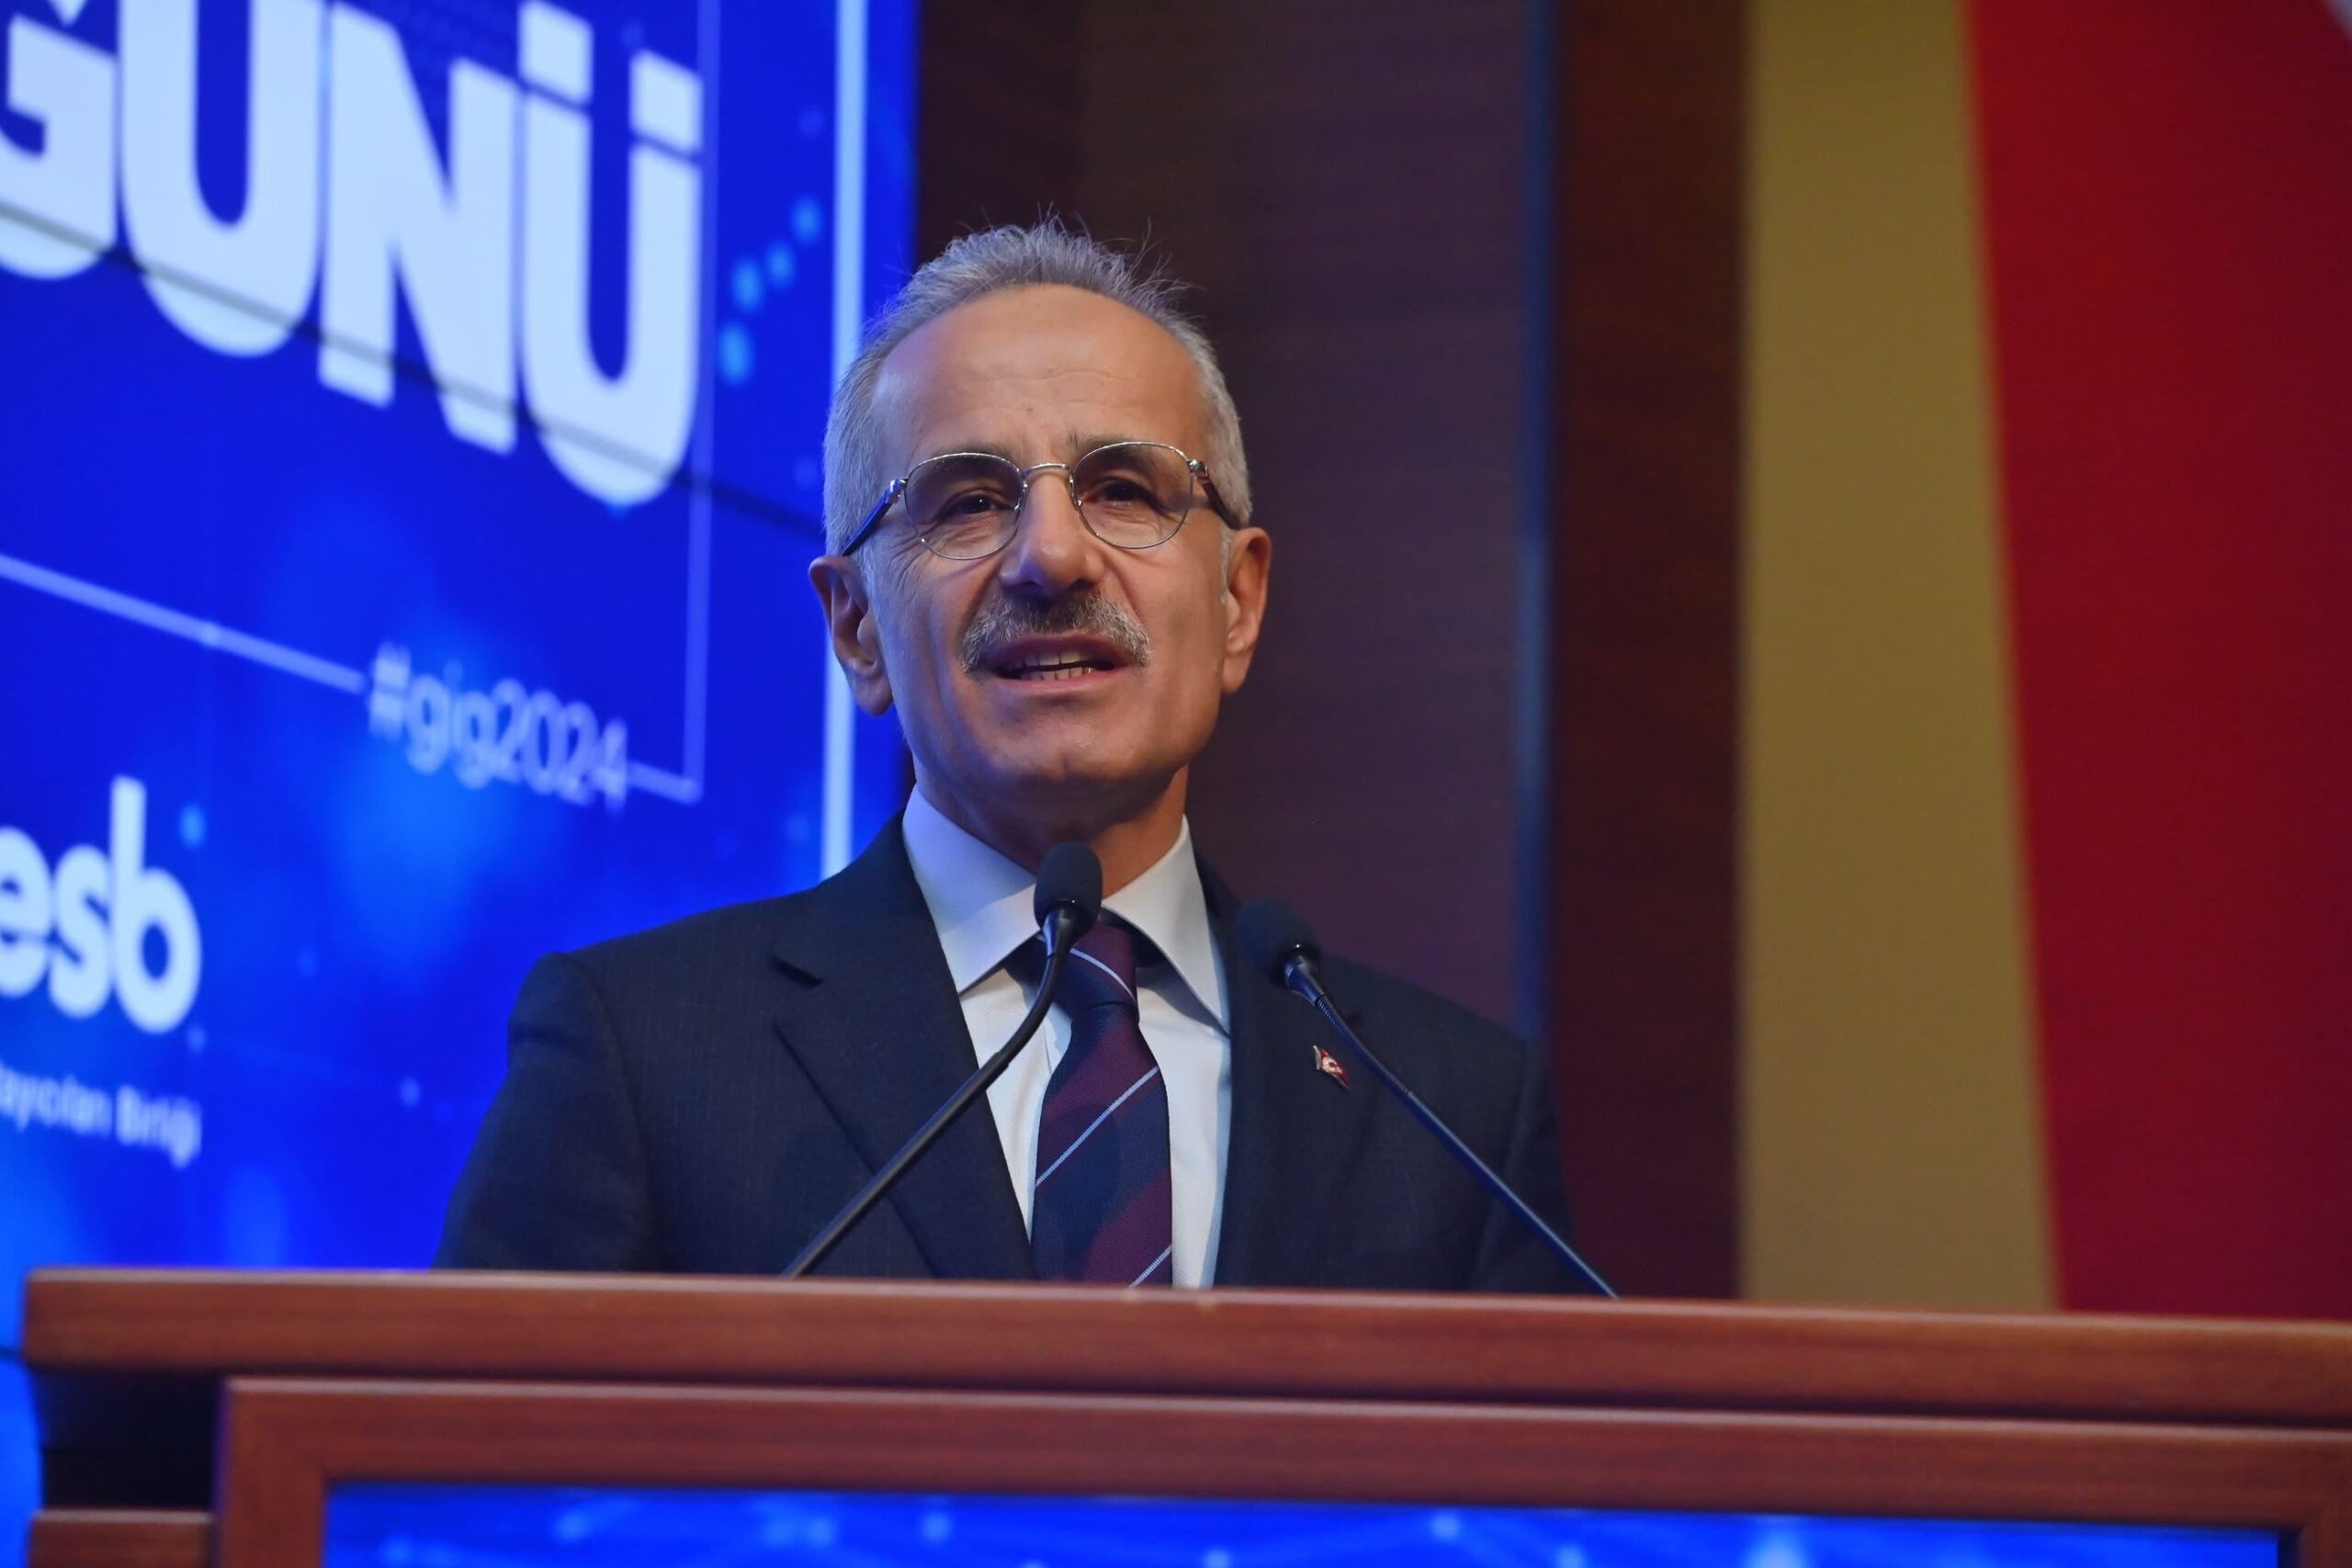 Minister Abdulkadir Uraloğlu highlights the "Butterfly Flaw" concept at the "Safer Internet Day," warning against excessive digital use in children. (DHA Photo)